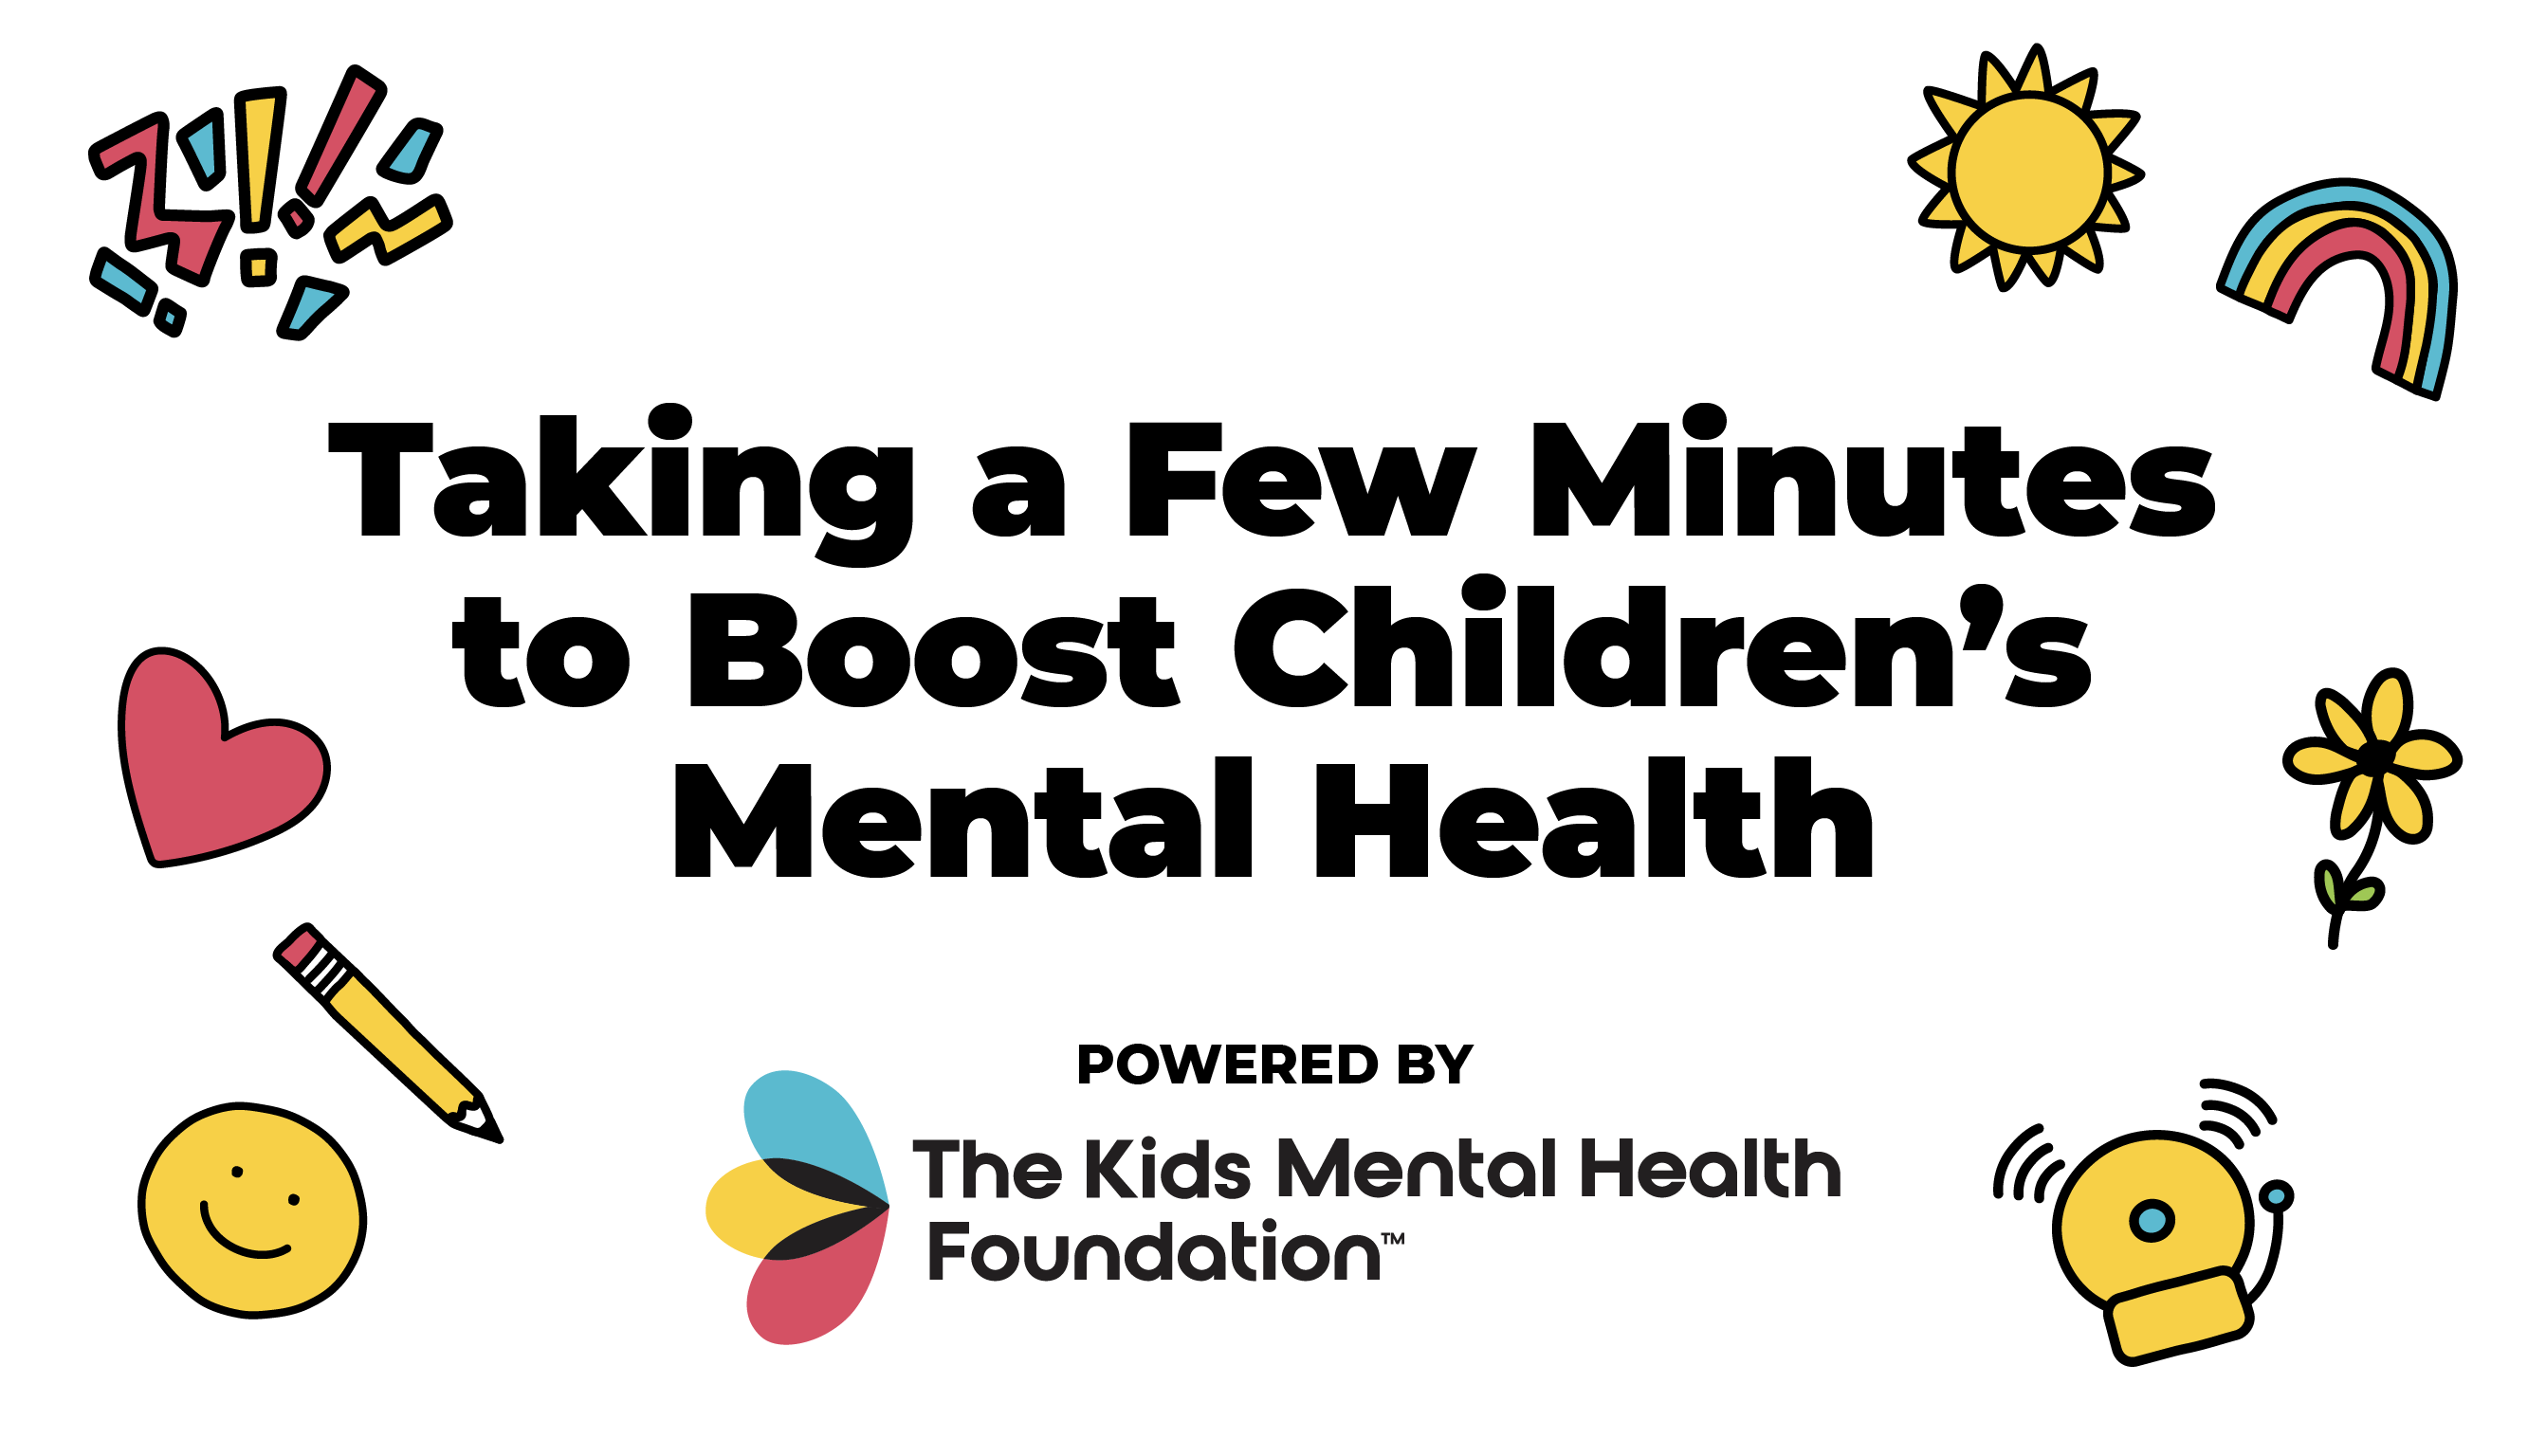 Taking a Few Minutes to Boost Children’s Mental Health